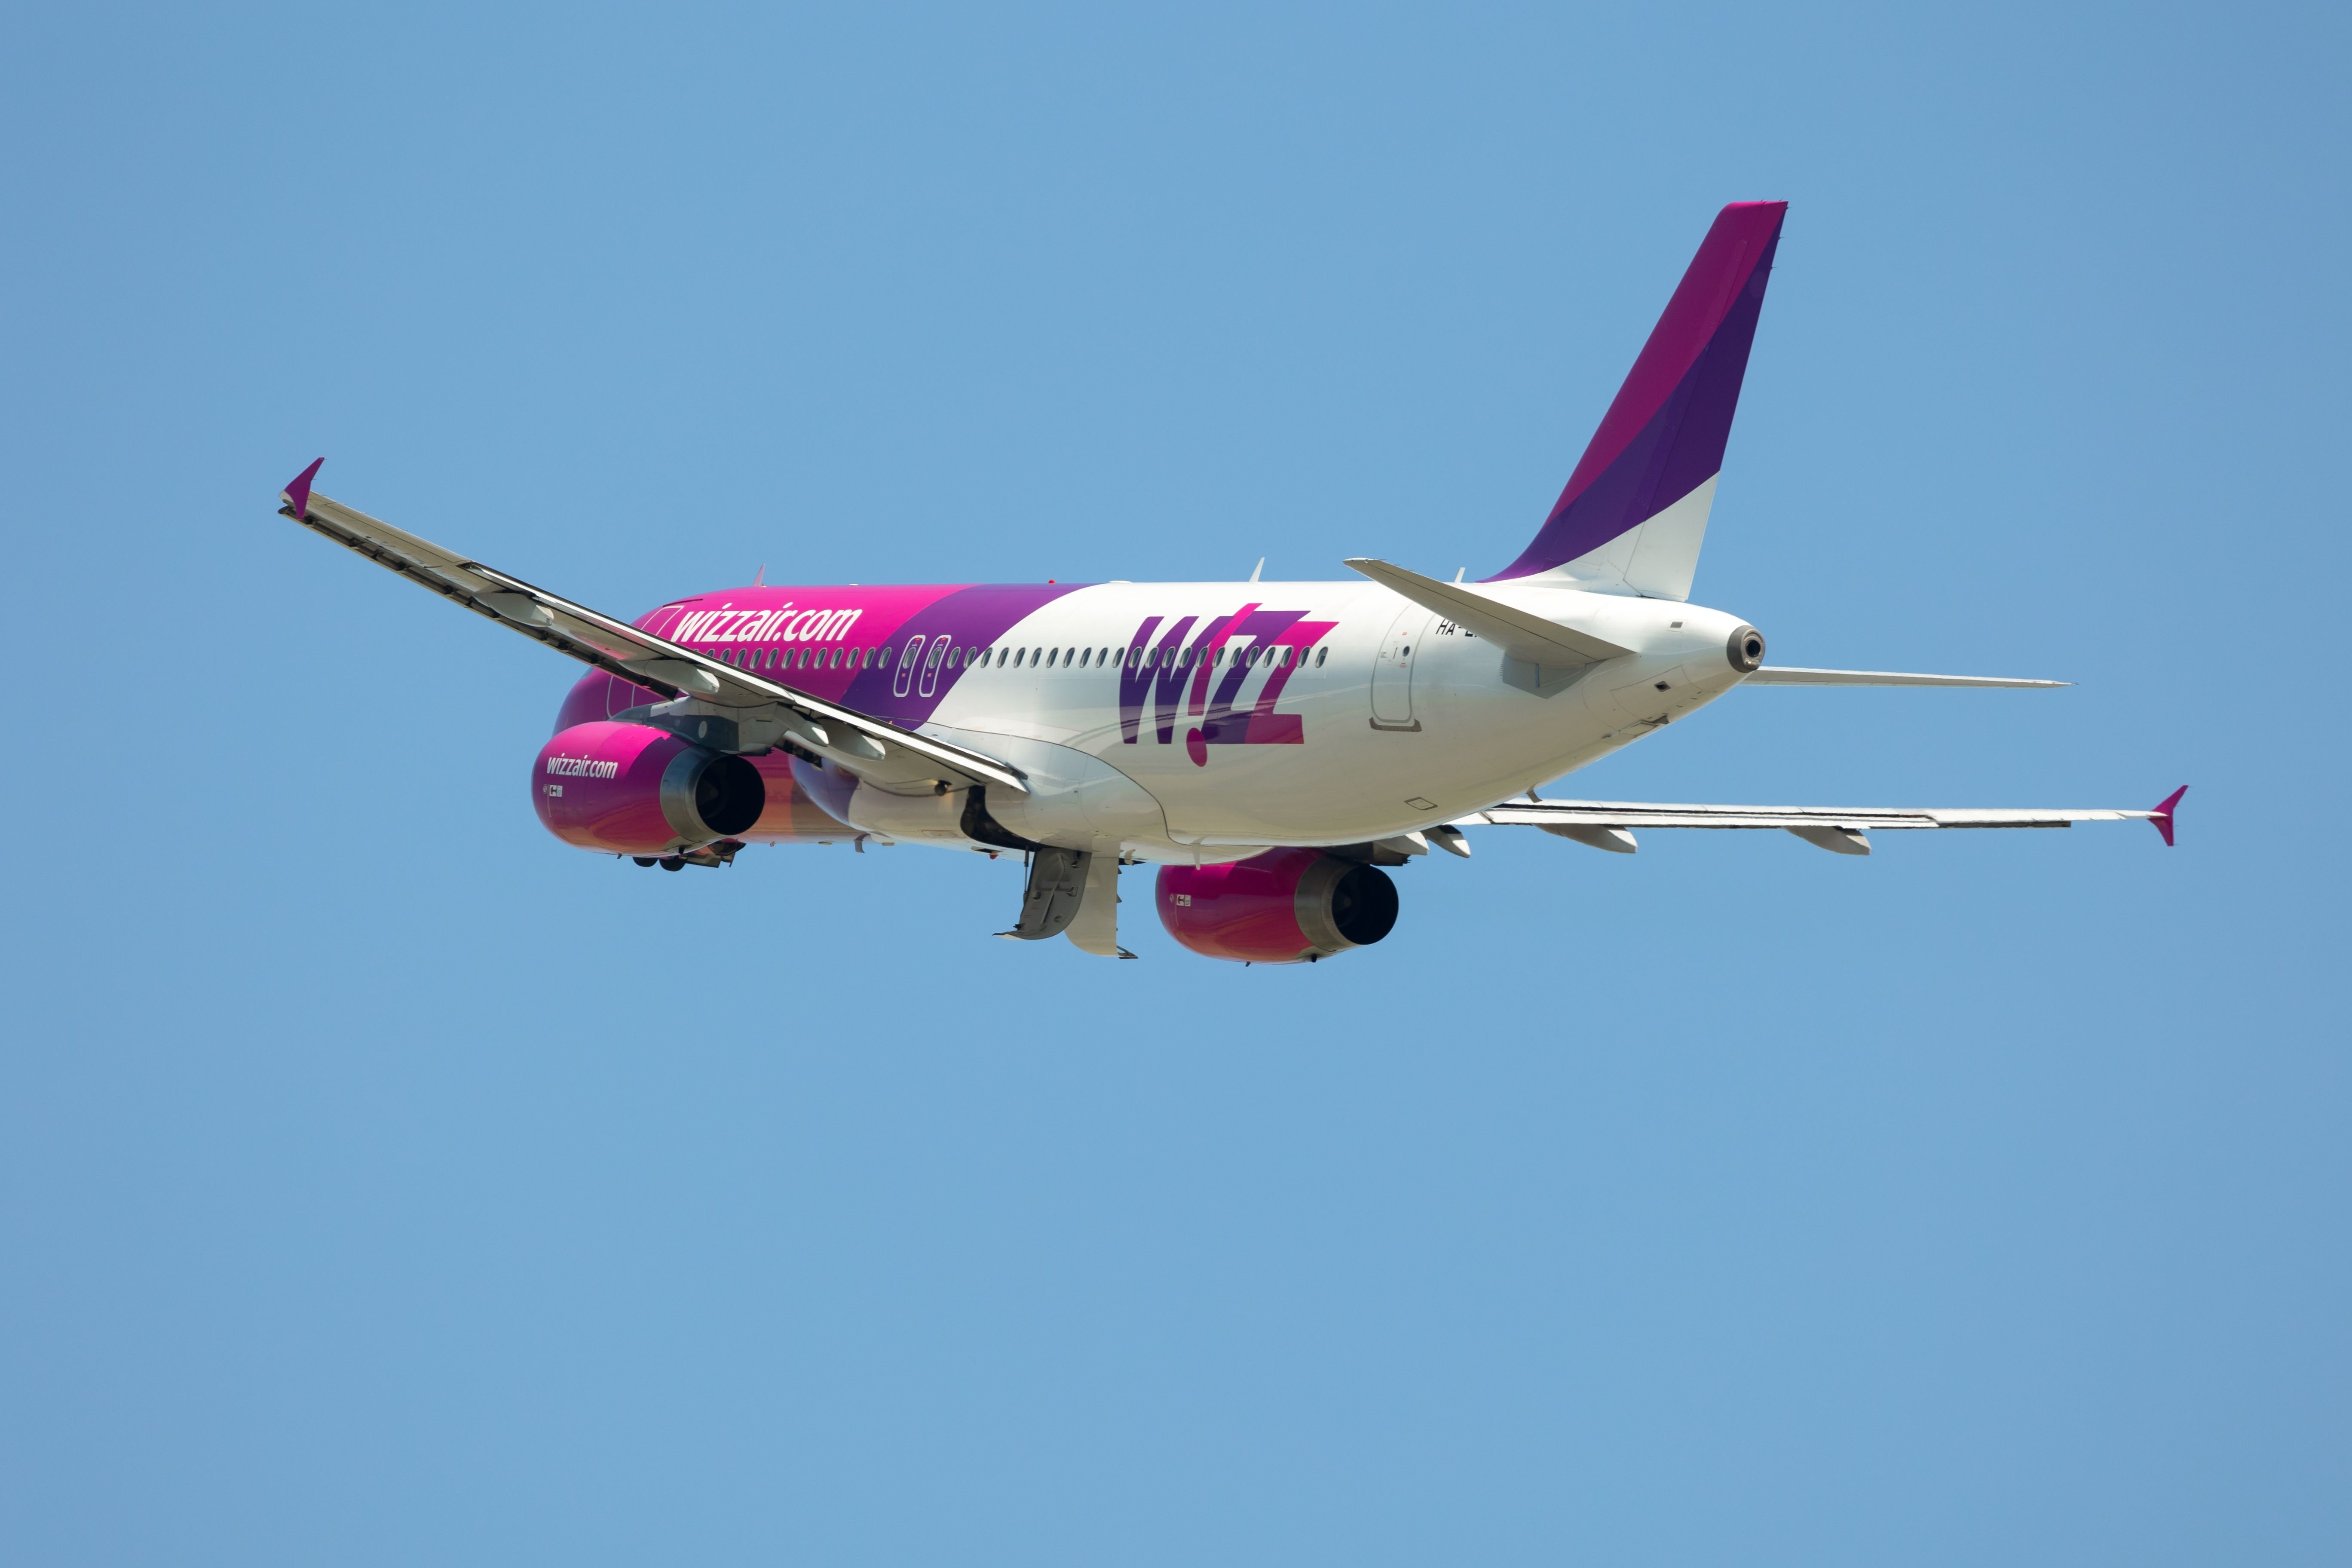 Wizz Air Airbus A321 during take-off from Prague Airport